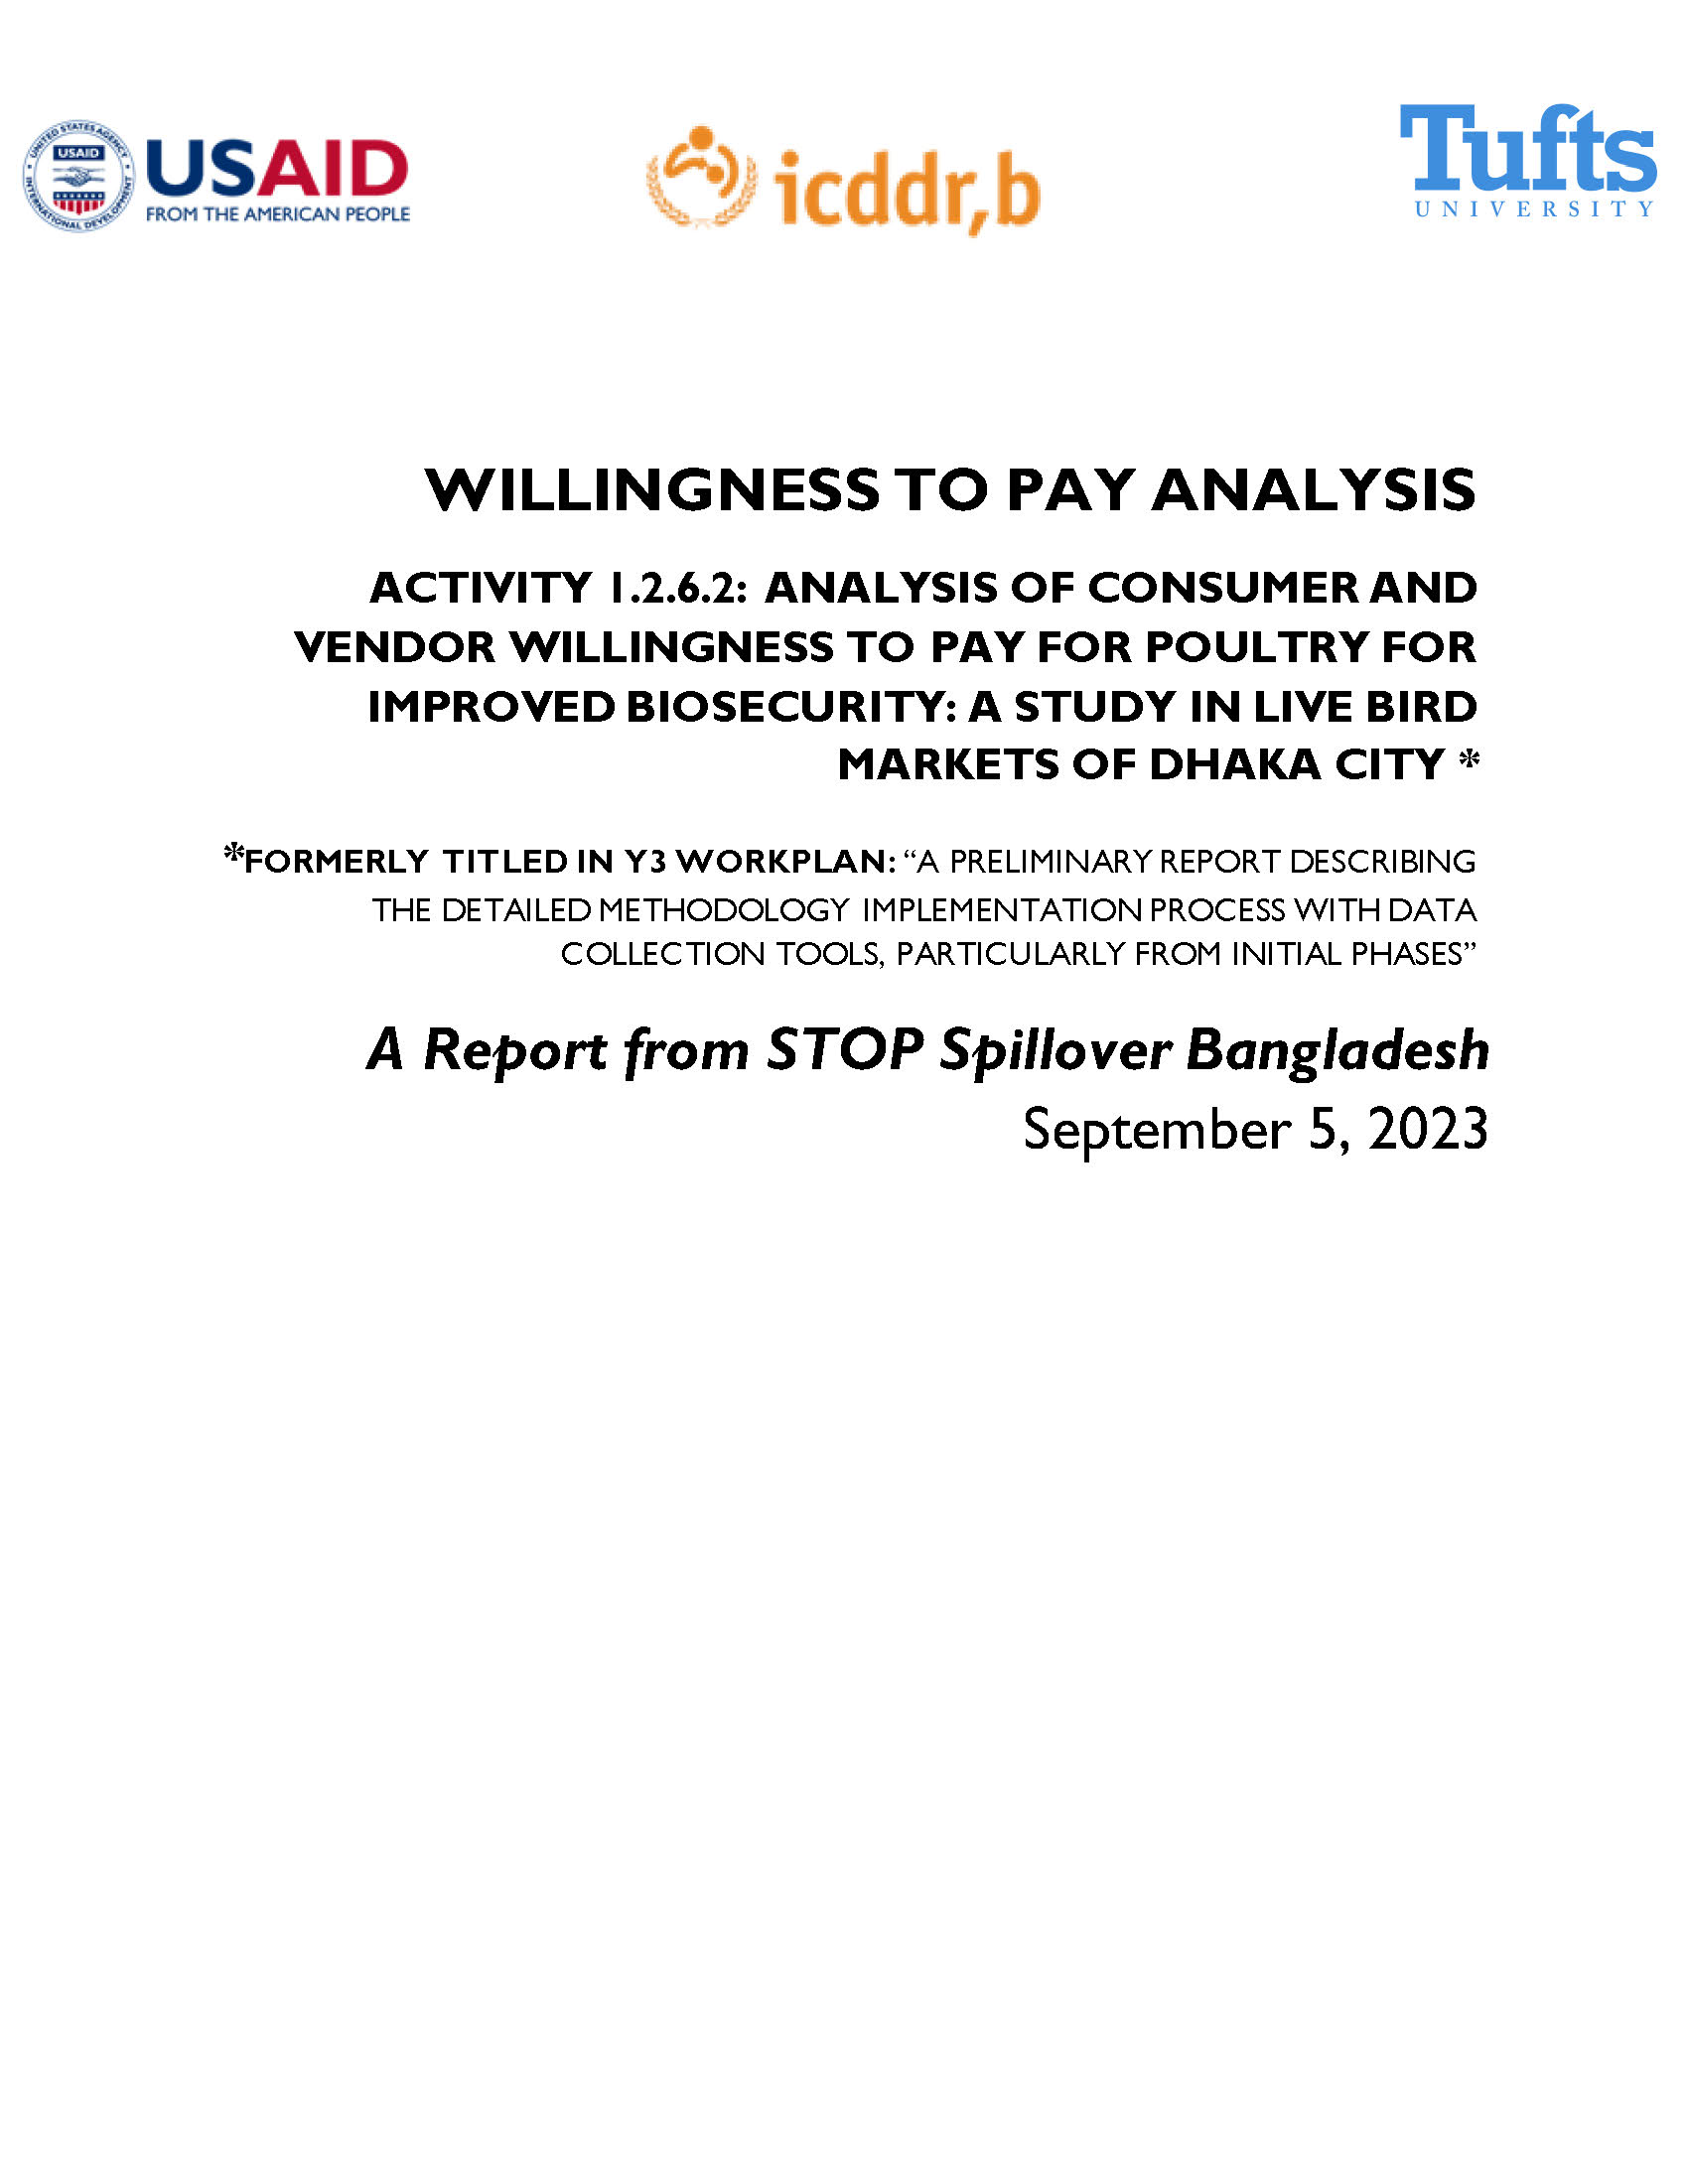 Thumbnail of report cover.